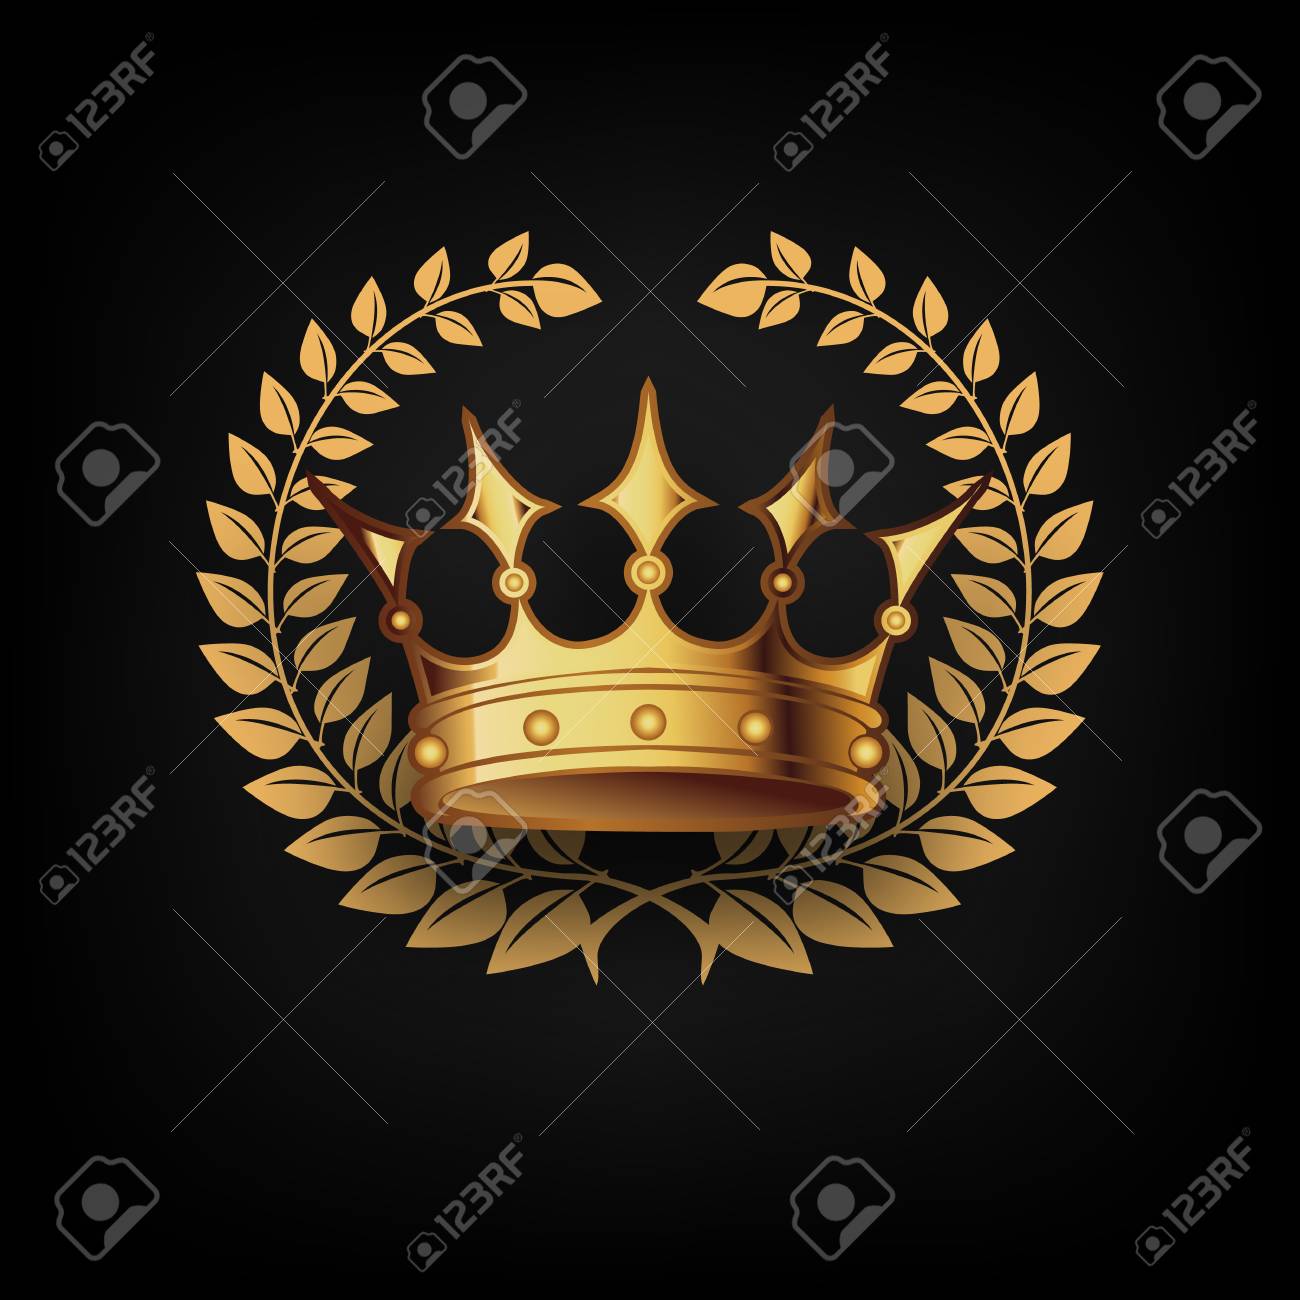 Golden Royal Crown With Laulel Wreath On Black Background Vector